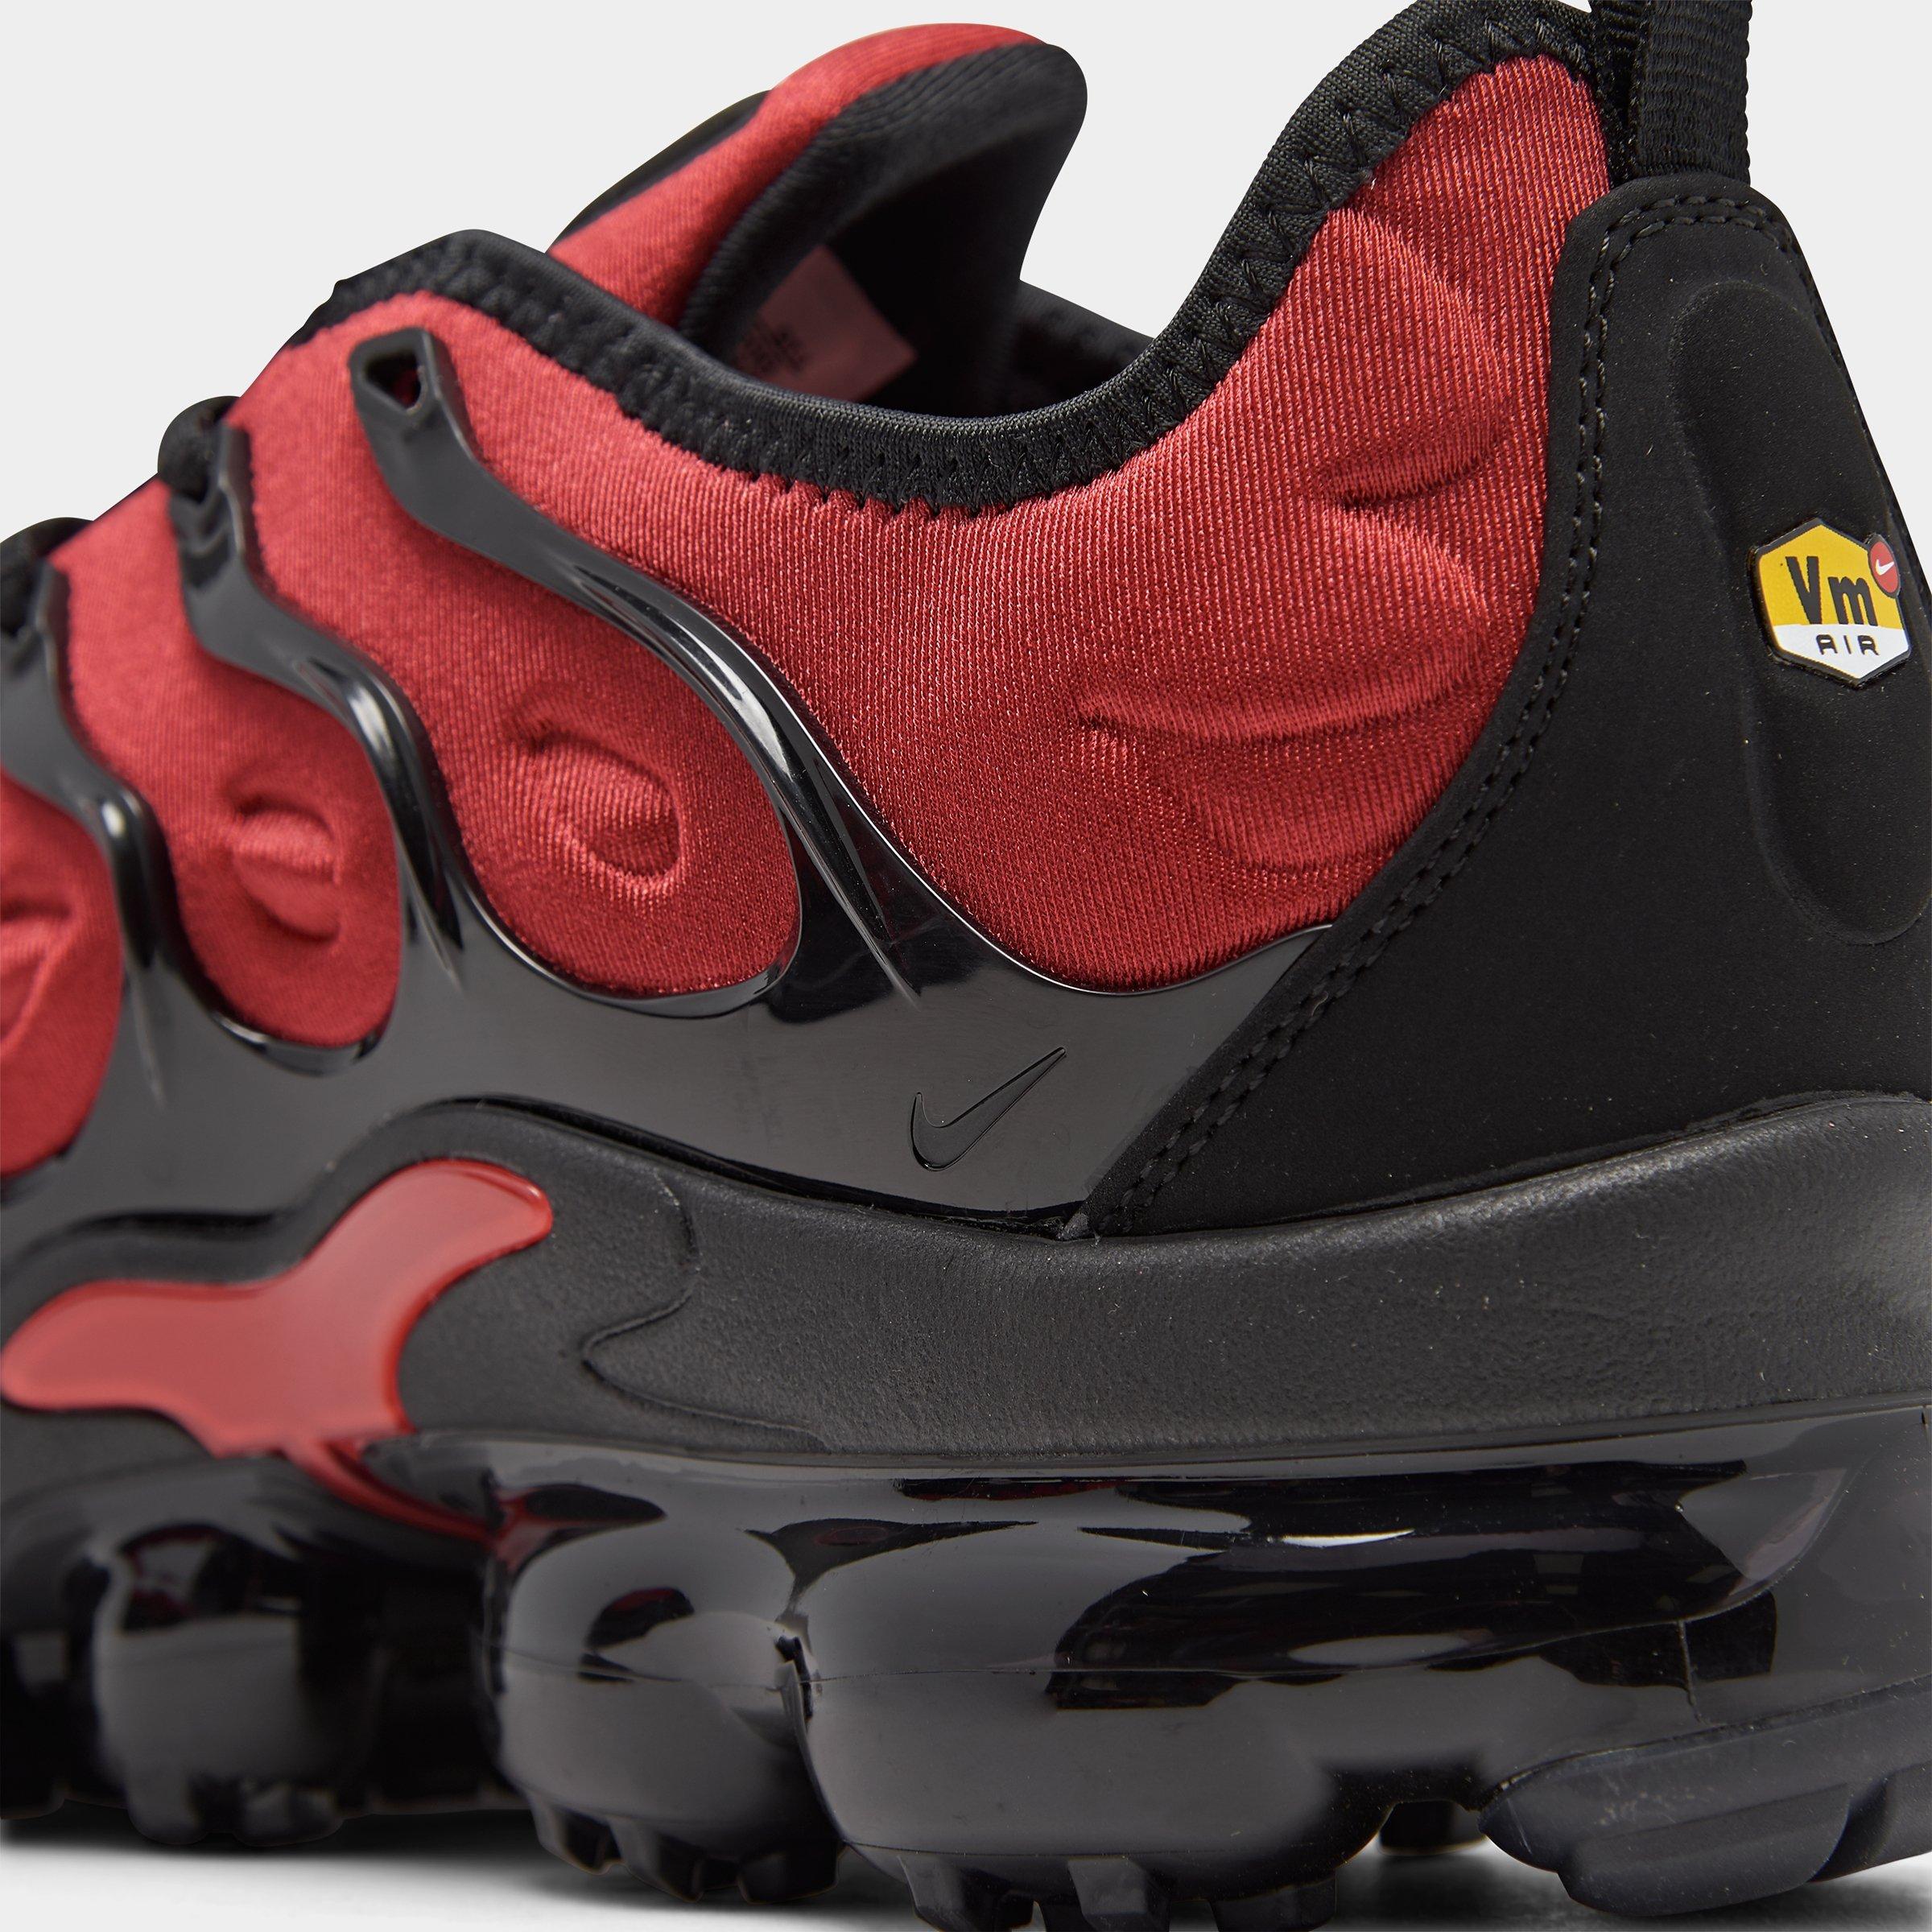 vapormax plus red and black